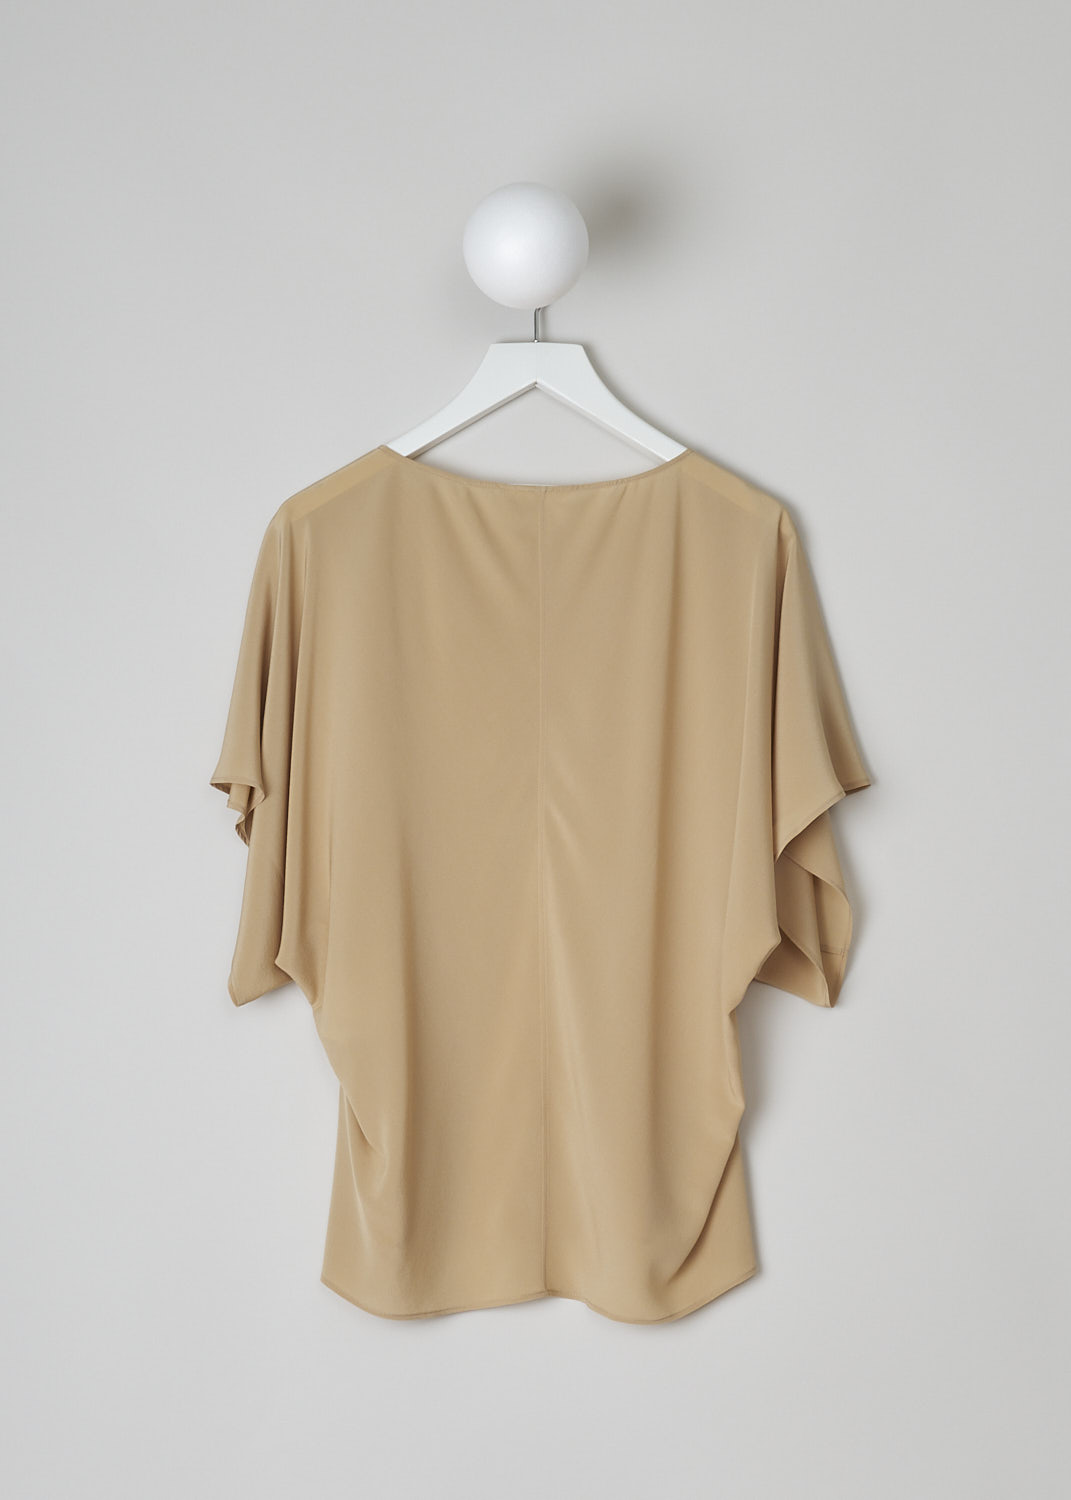 CHLOÉ, PEARL BEIGE SILK TOP, CHC22UHT12004278,  Beige, Back, This pearl beige silk top has a boat neckline and loose short cap sleeves. The top has side slits and a straight hemline. 
